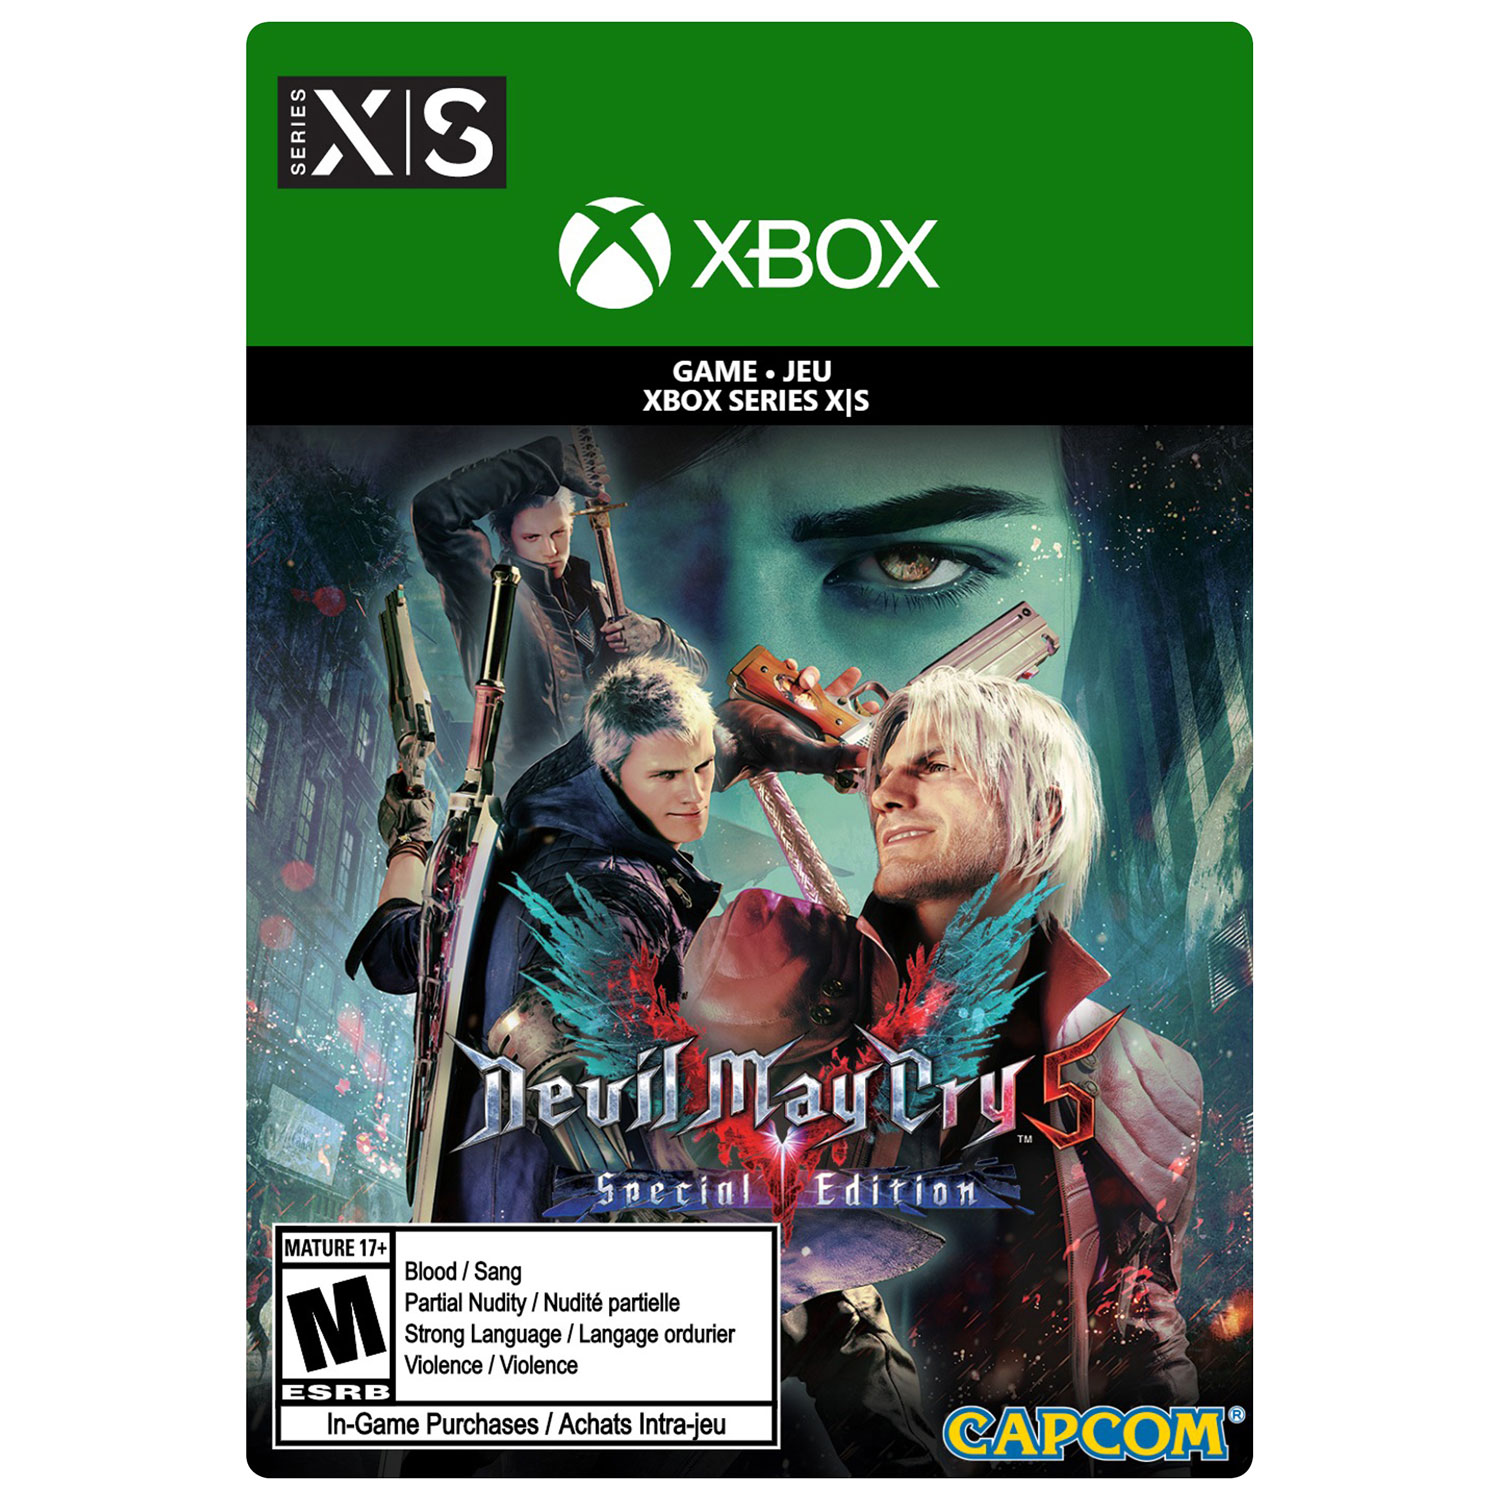 Devil May Cry 5 Special Edition (Xbox Series X|S) - Digital Download